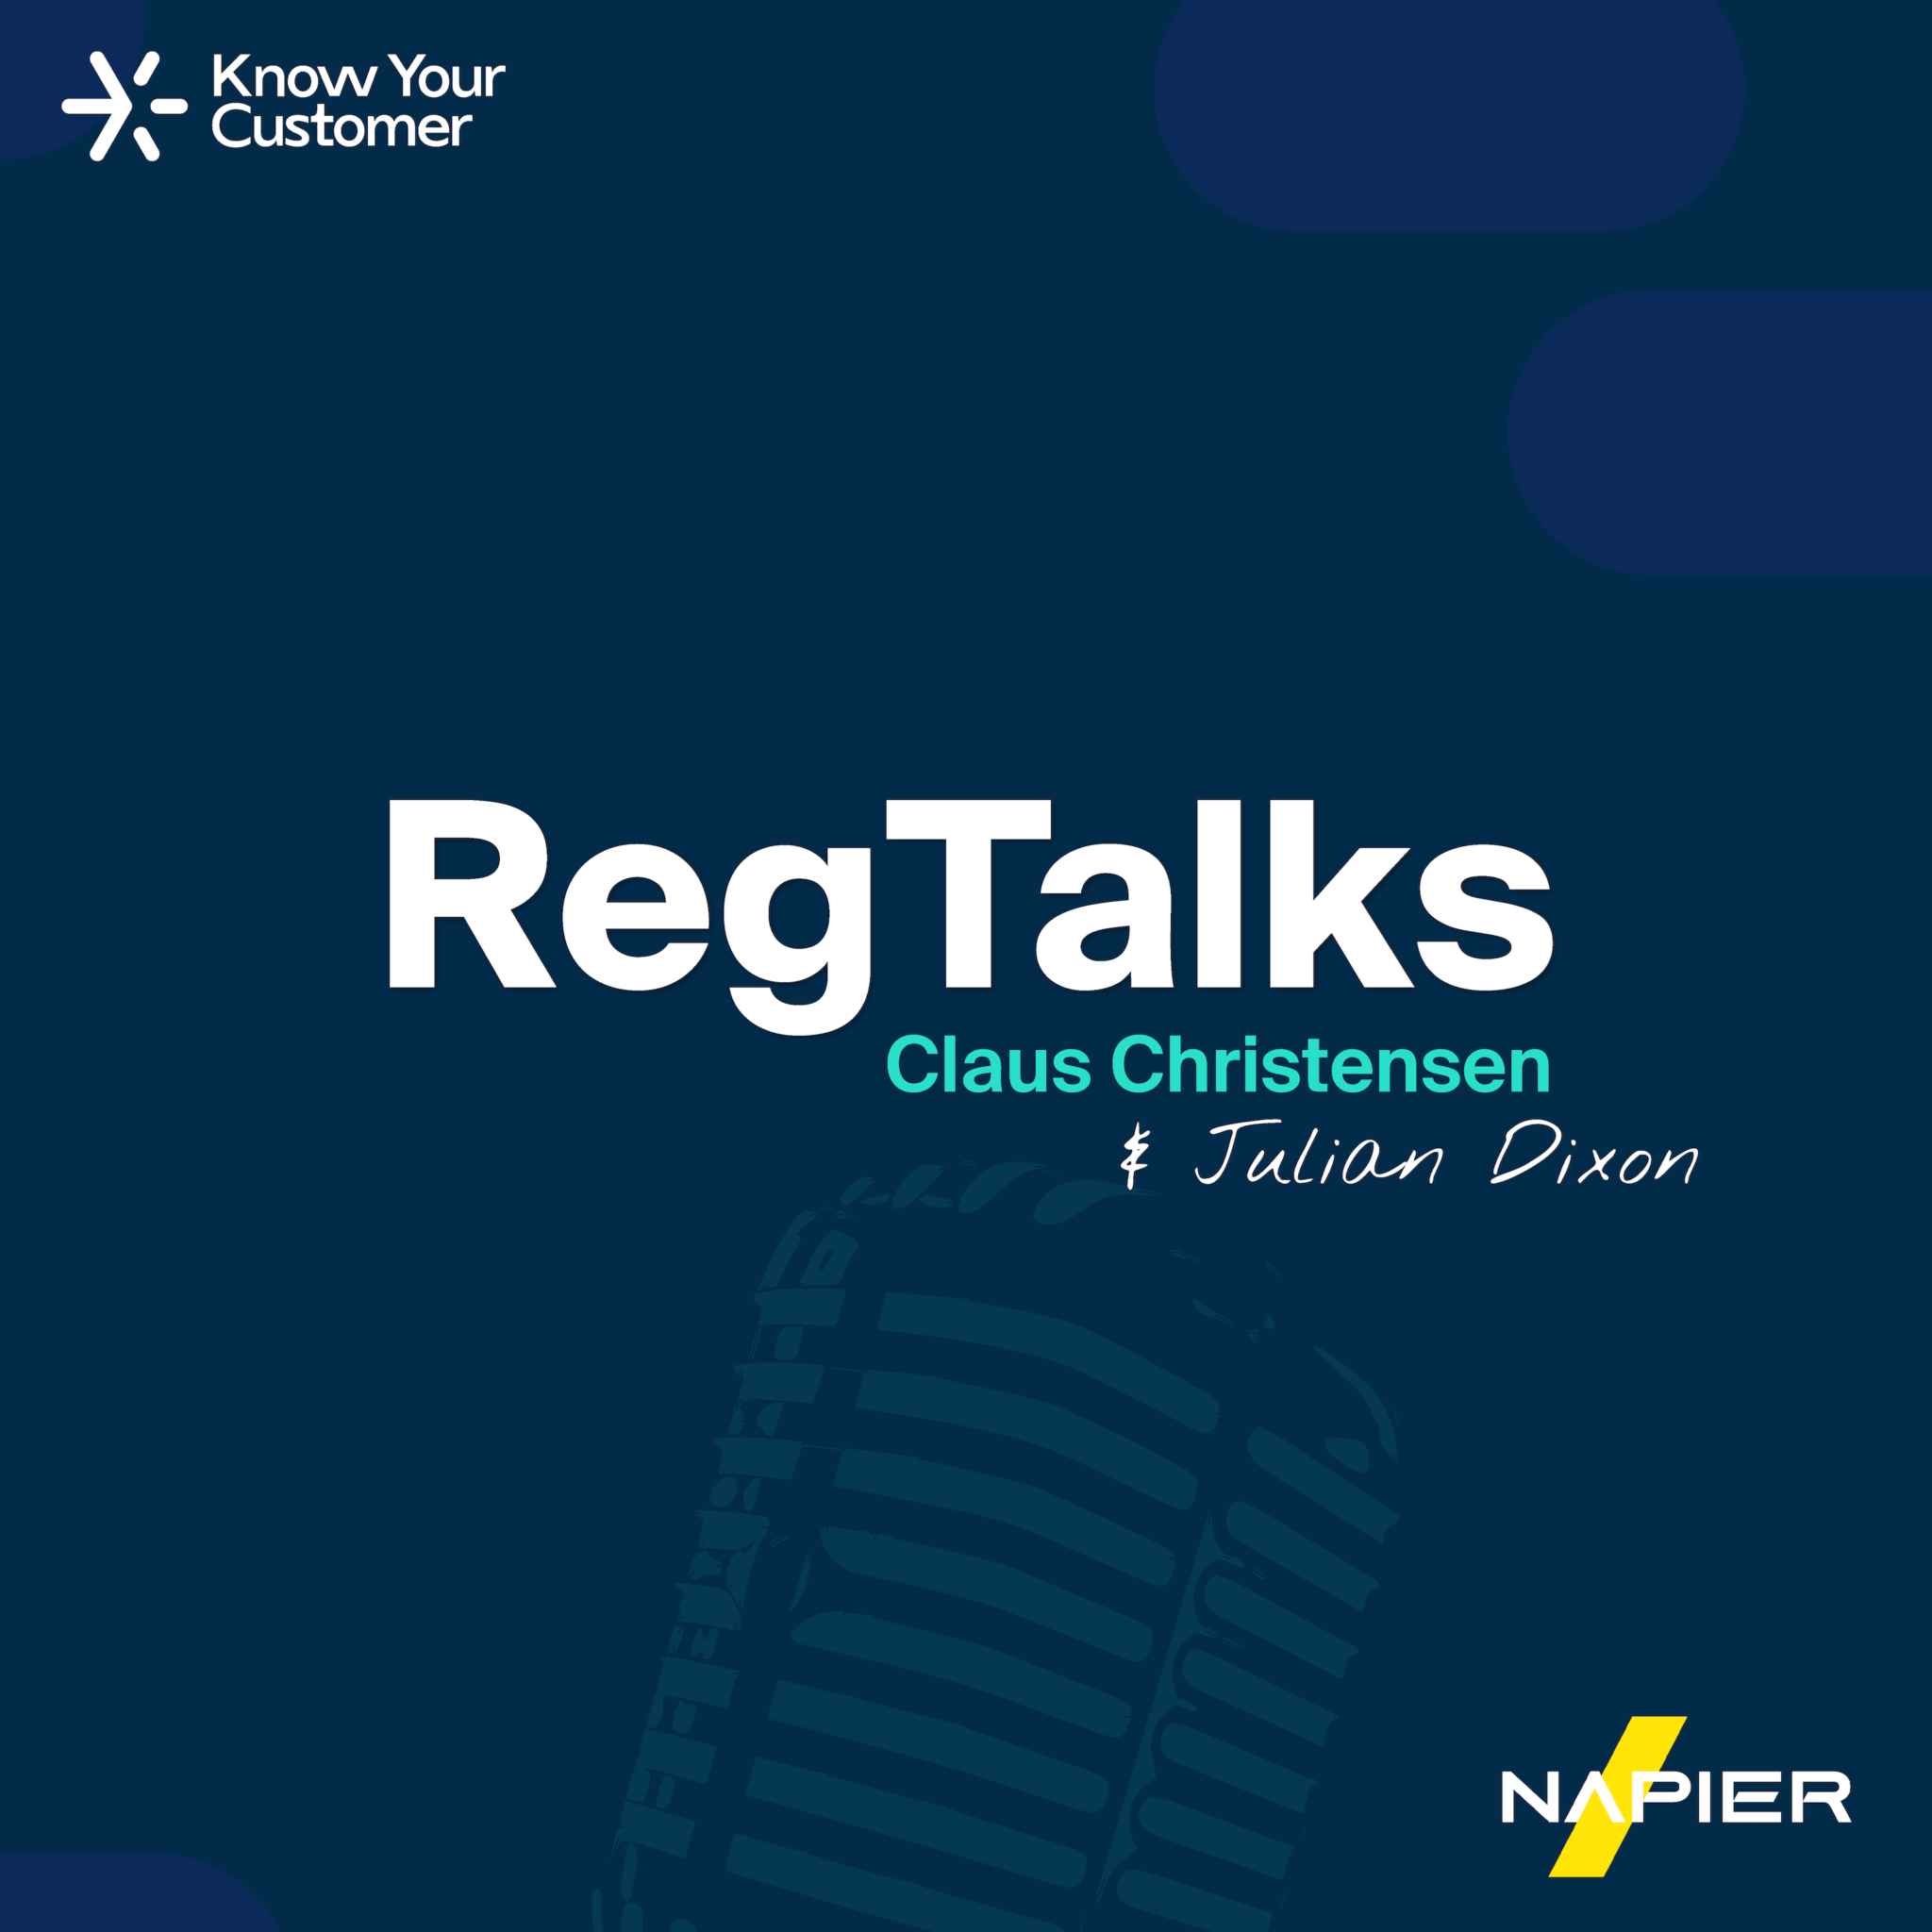 RegTalks podcast with Claus Christensen and Julian Dixon, Know Your Customer and Napier